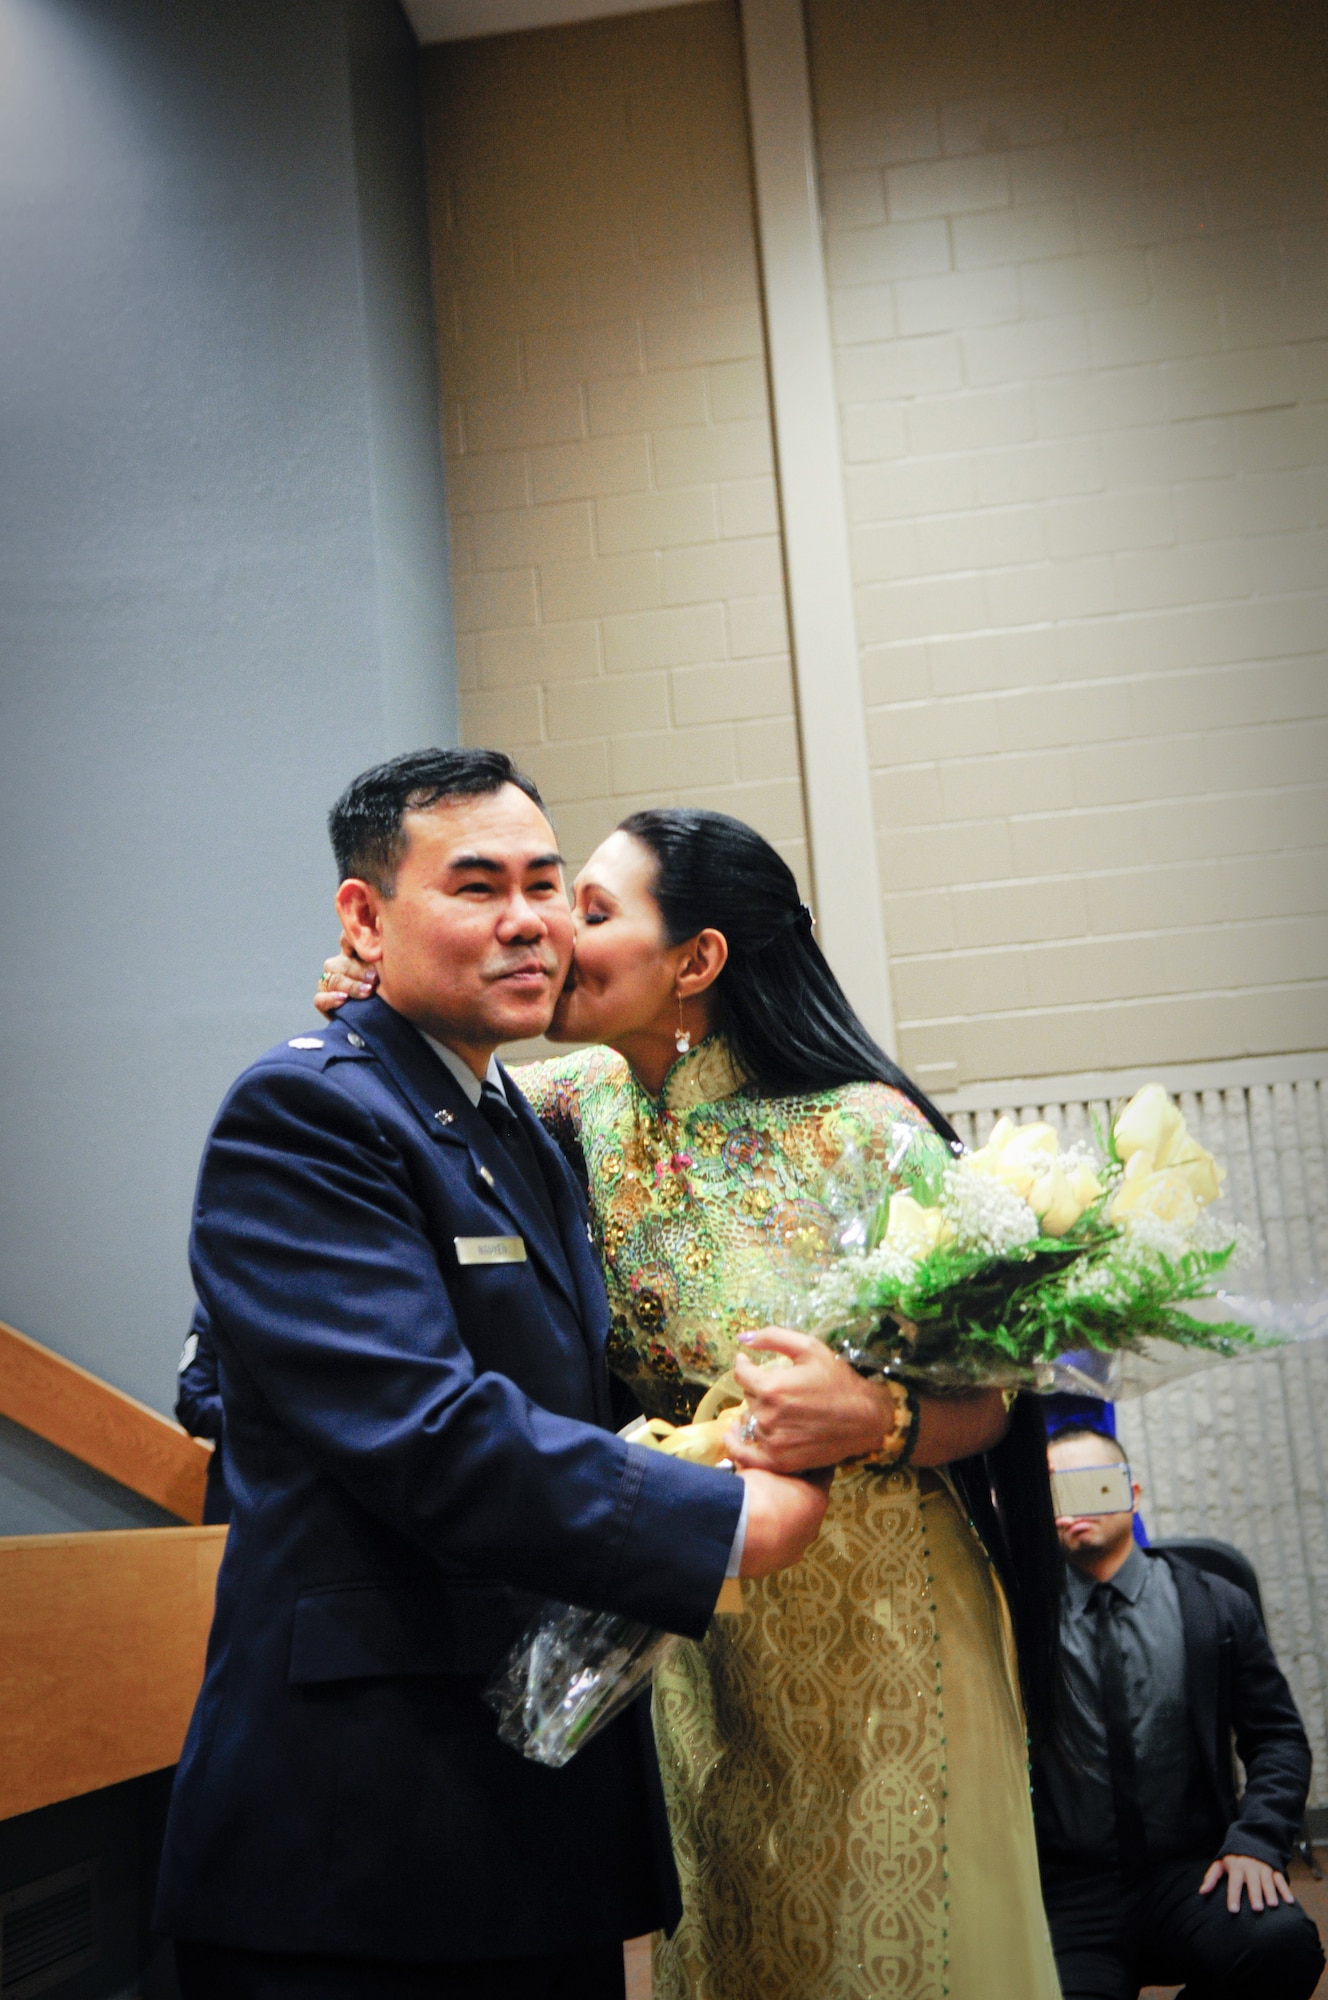 Air Force Lt. Col. Don Nguyen, assistant director of operations for the 273rd Information Operations Squadron (IOS), Texas Air National Guard, is kissed by his wife, Huyen Vu, during his retirement ceremony in San Antonio, Nov. 23, 2014. Nguyen retired after 27 years of military service, including time with the Texas Army and Air National Guards. (U.S. Air National Guard photo by Tech. Sgt. Eric L. Wilson / Released) 141123-Z-IT549-004